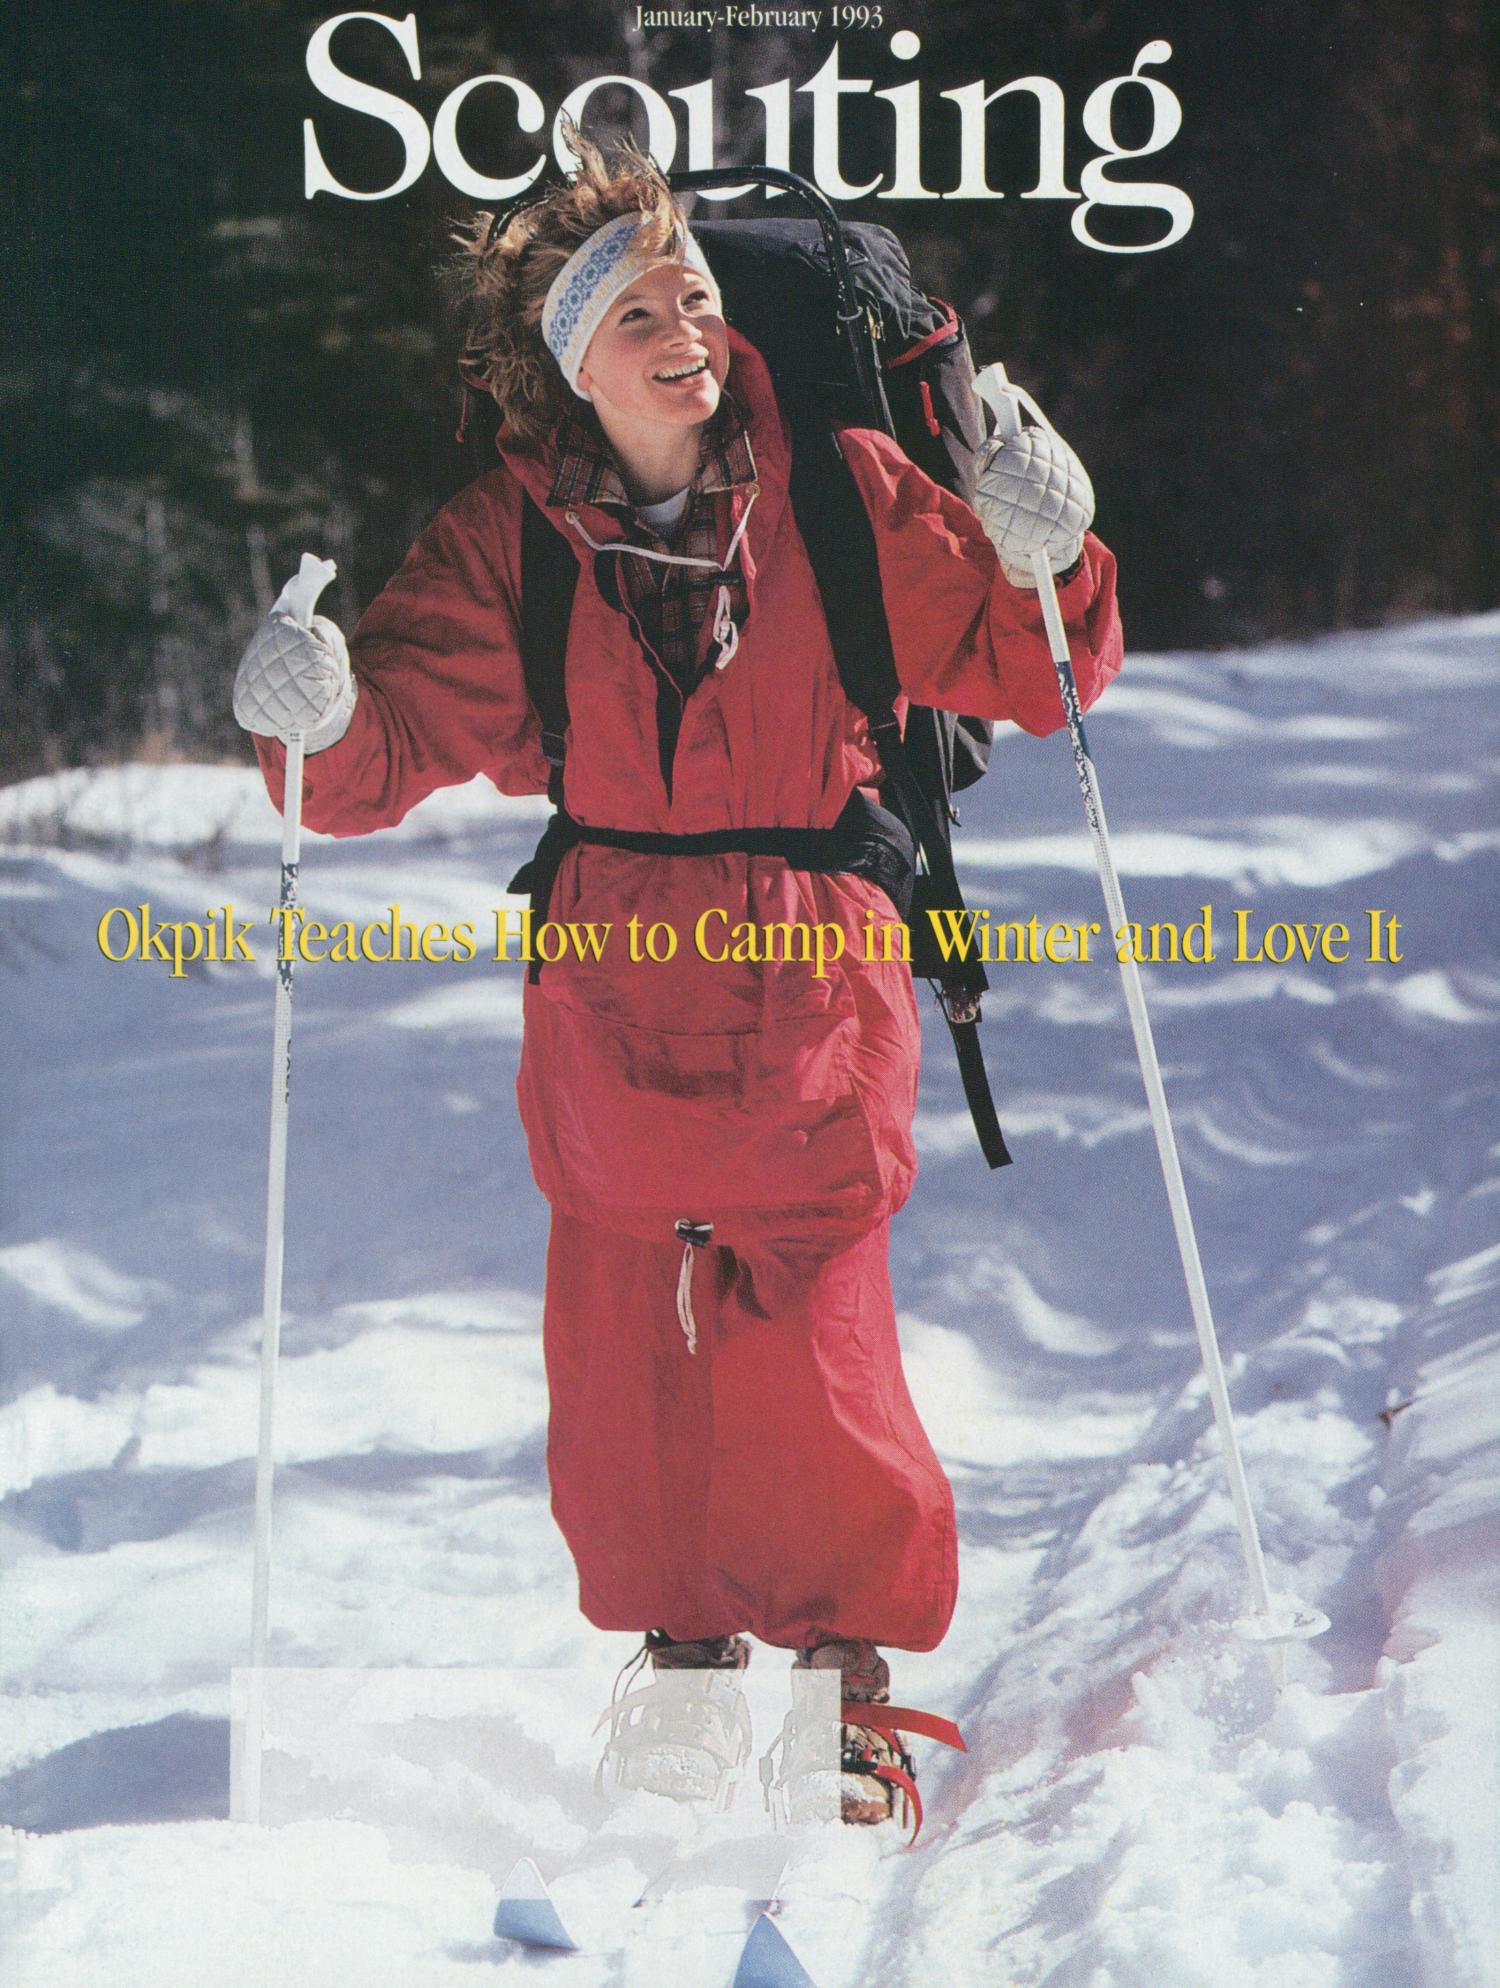 Scouting, Volume 81, Number 1, January-February 1993
                                                
                                                    Front Cover
                                                